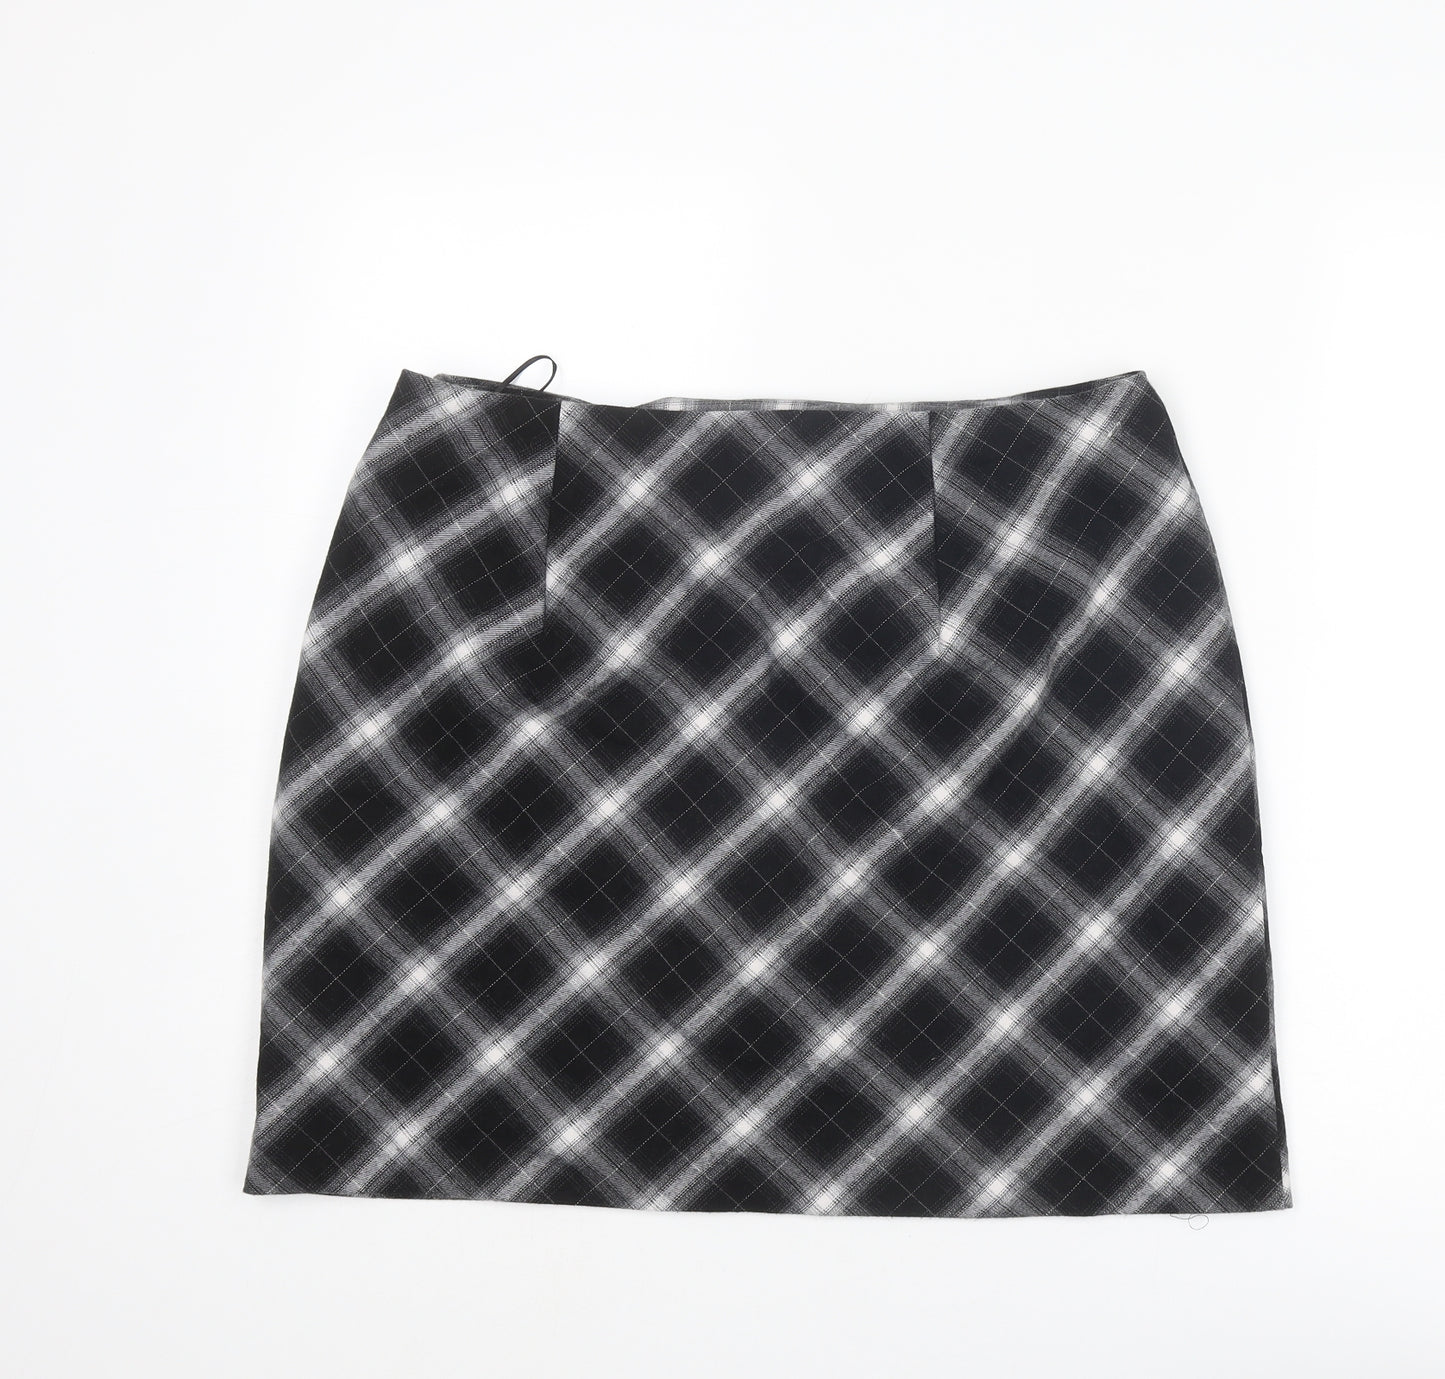 New Look Womens Black Plaid Polyester A-Line Skirt Size 16 Zip